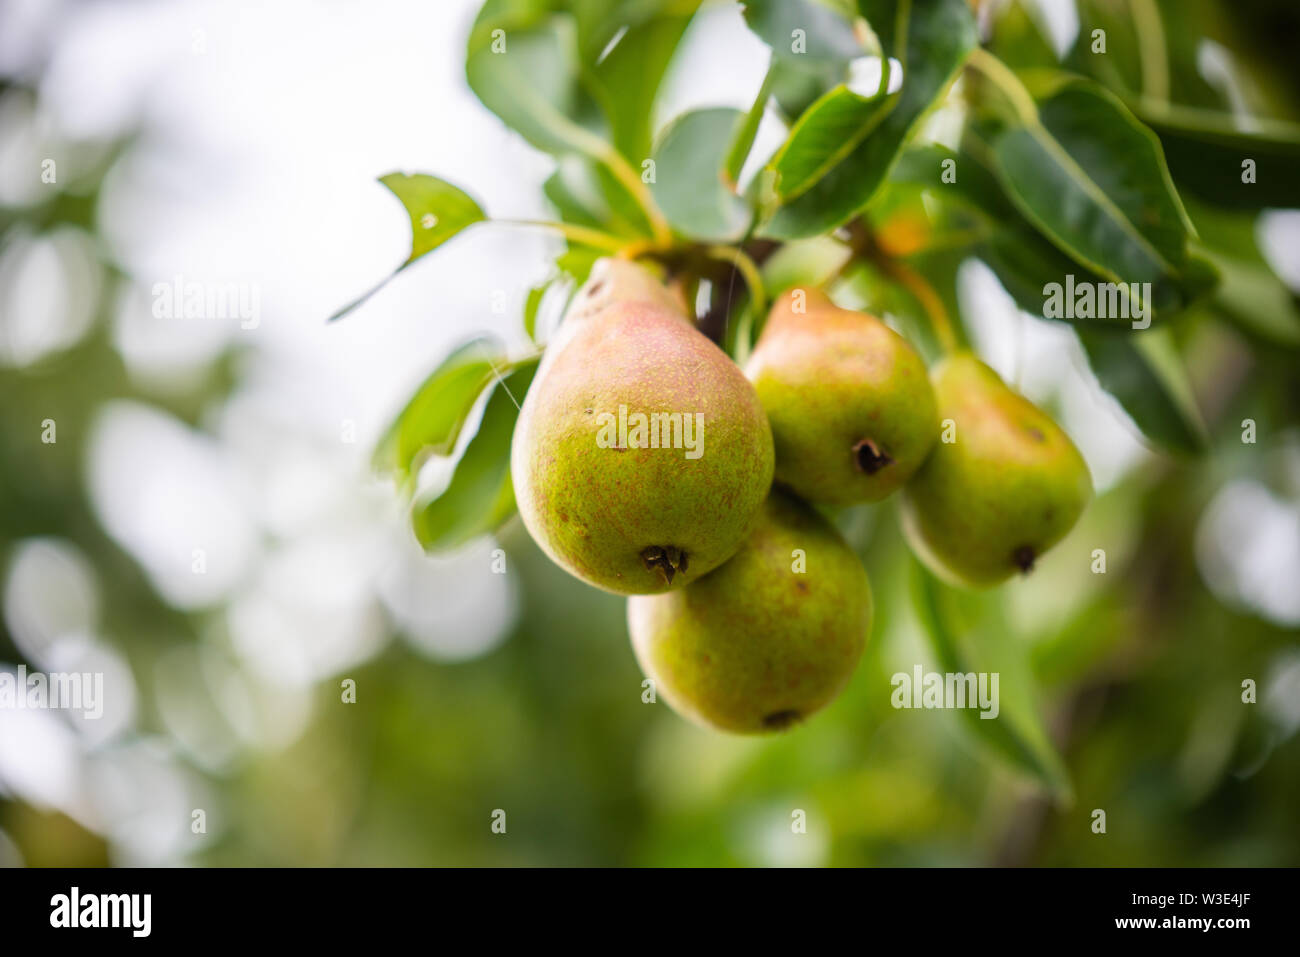 Almost ripe pears grow on a pear tree Stock Photo